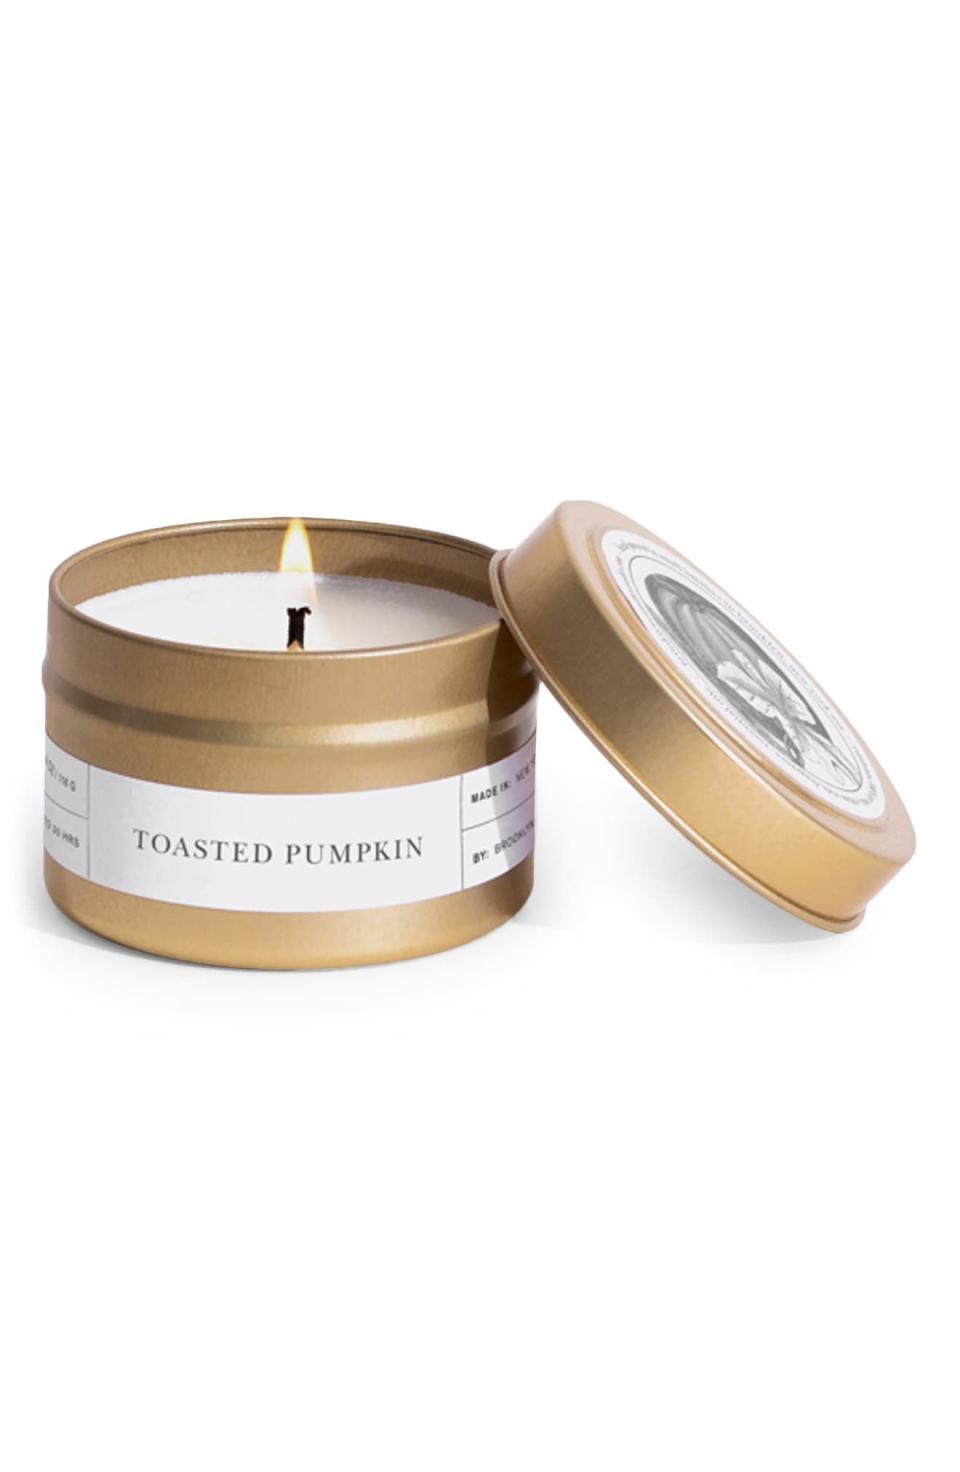 18) Toasted Pumpkin Travel Candle